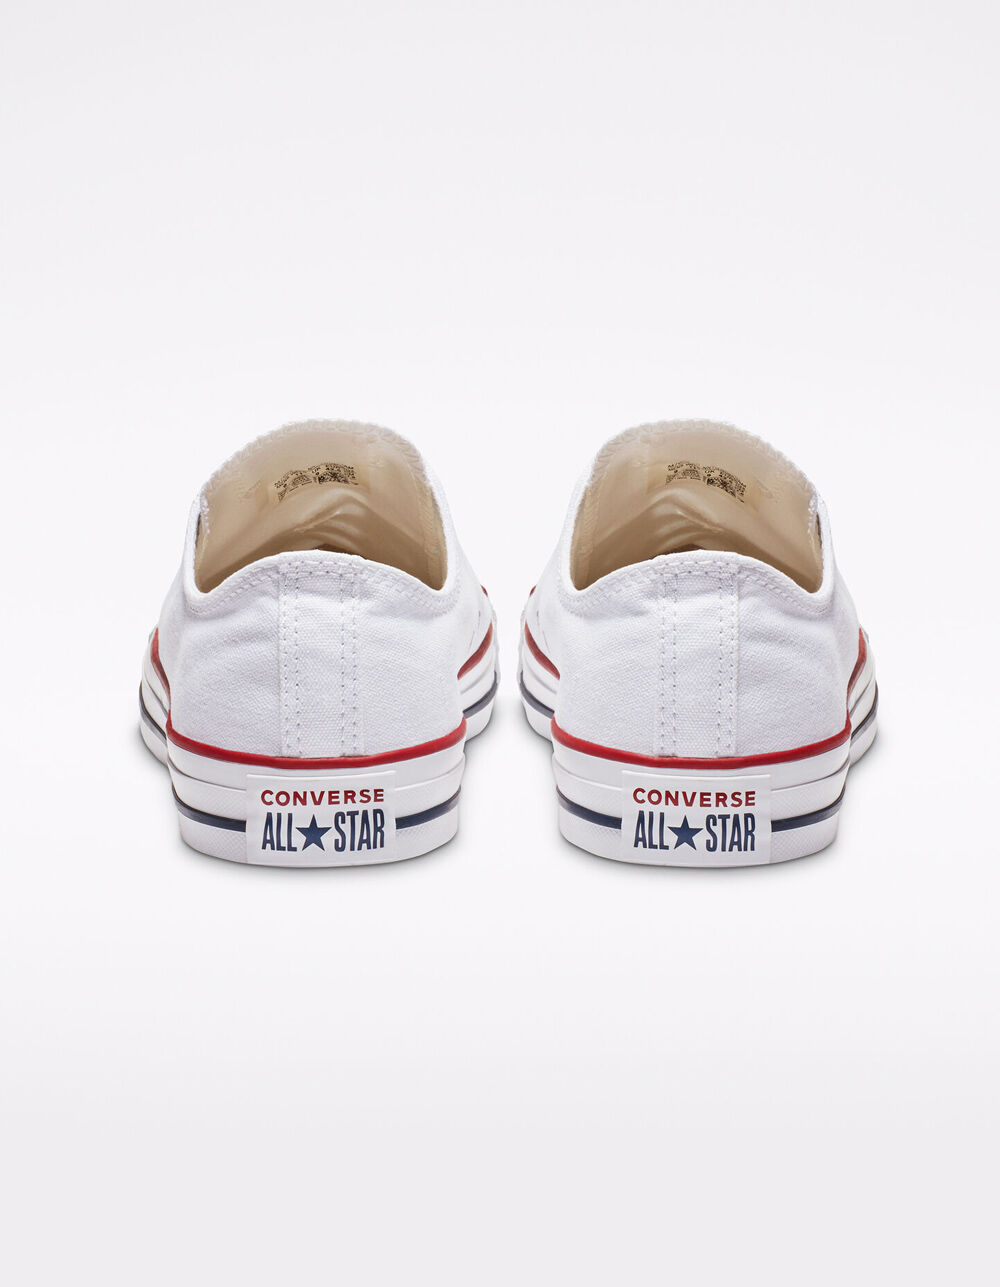 Converse Chuck Taylor All Star White Low Tops | Tillys